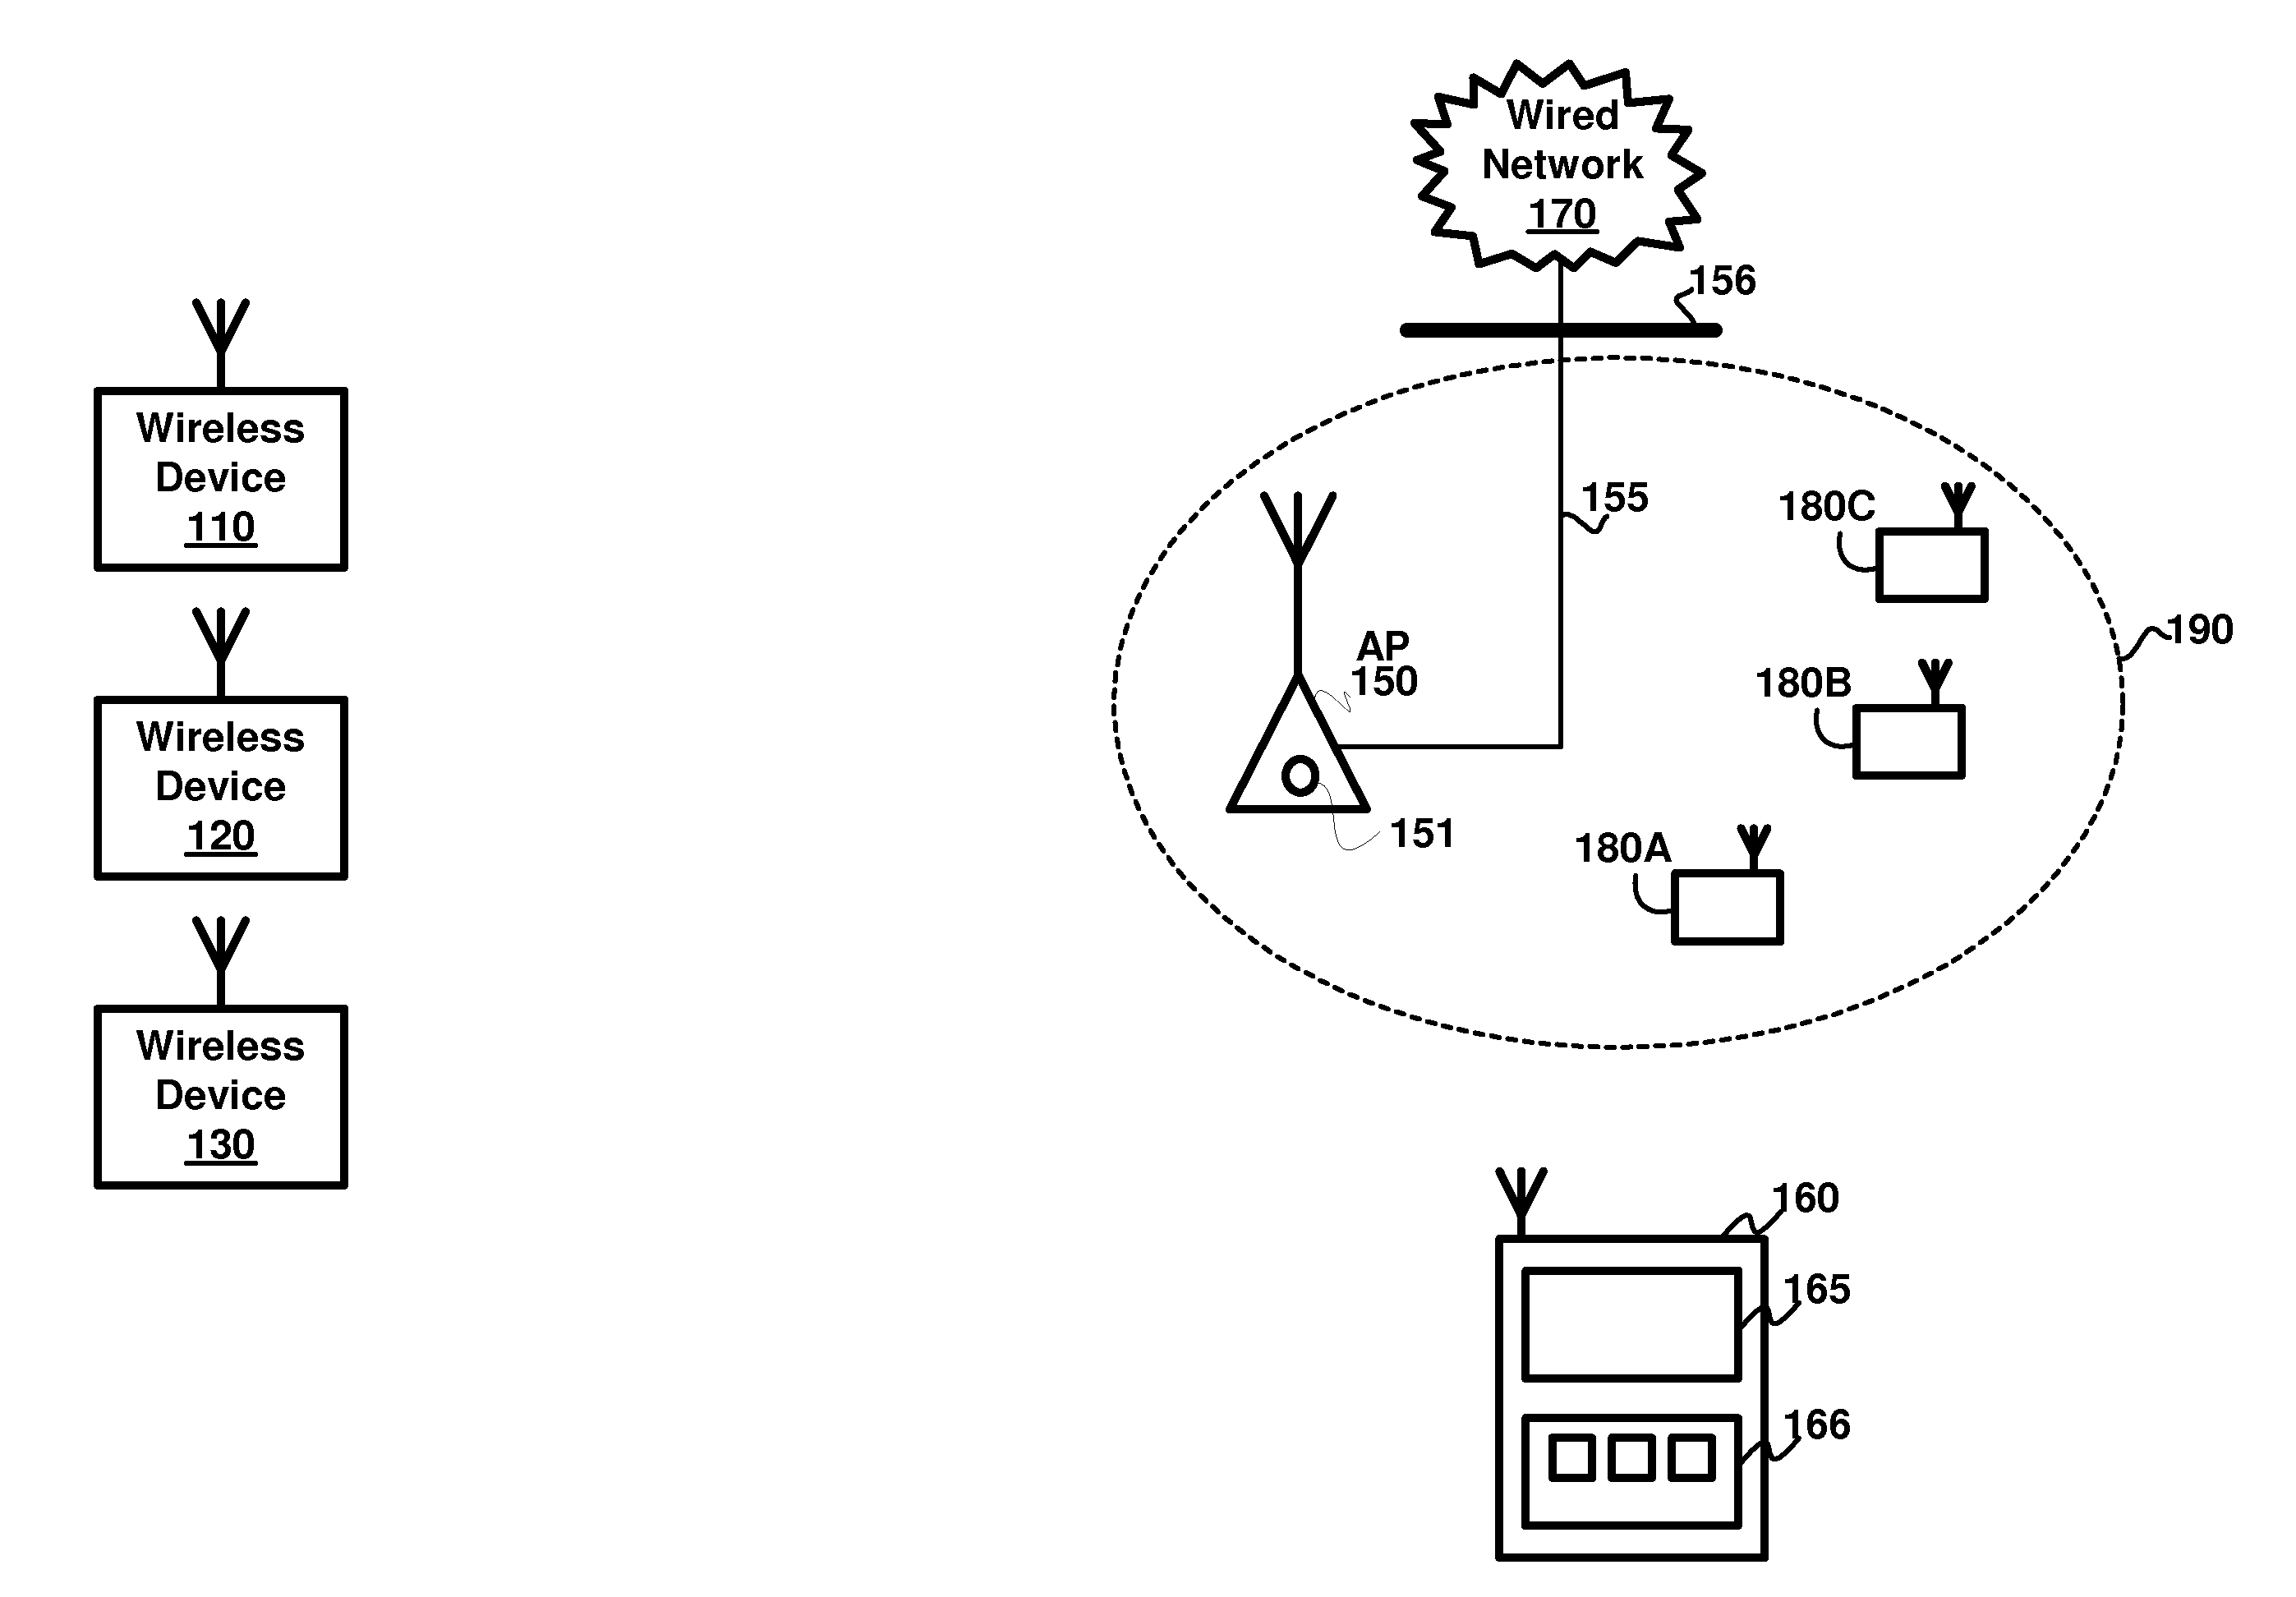 Provisioning a wireless device for secure communication using an access point designed with push-button mode of wps (wi-fi protected setup)